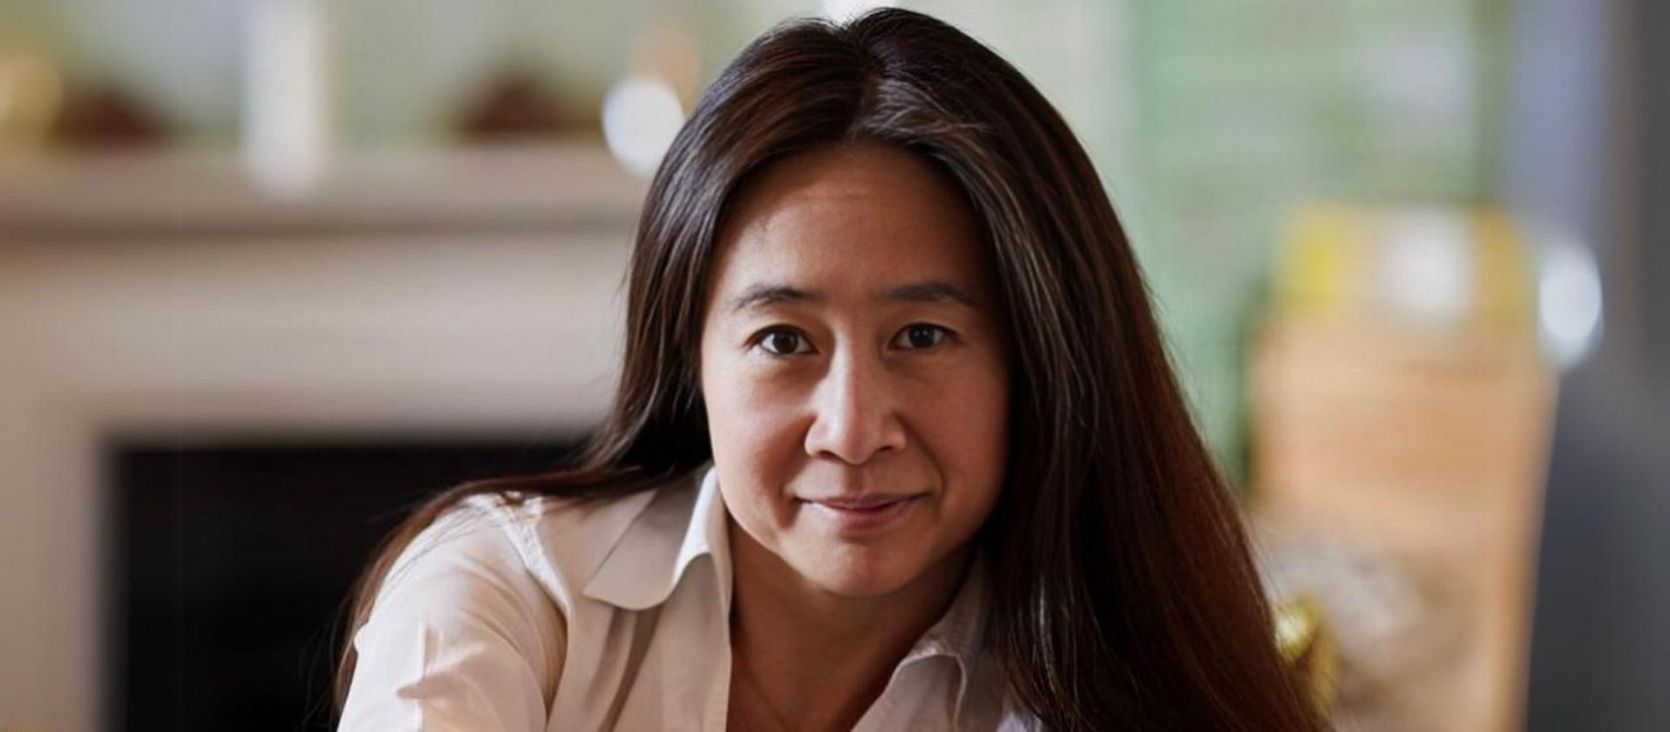 Photo for: Championing Change: Queena Wong’s Impact on the Wine Industry